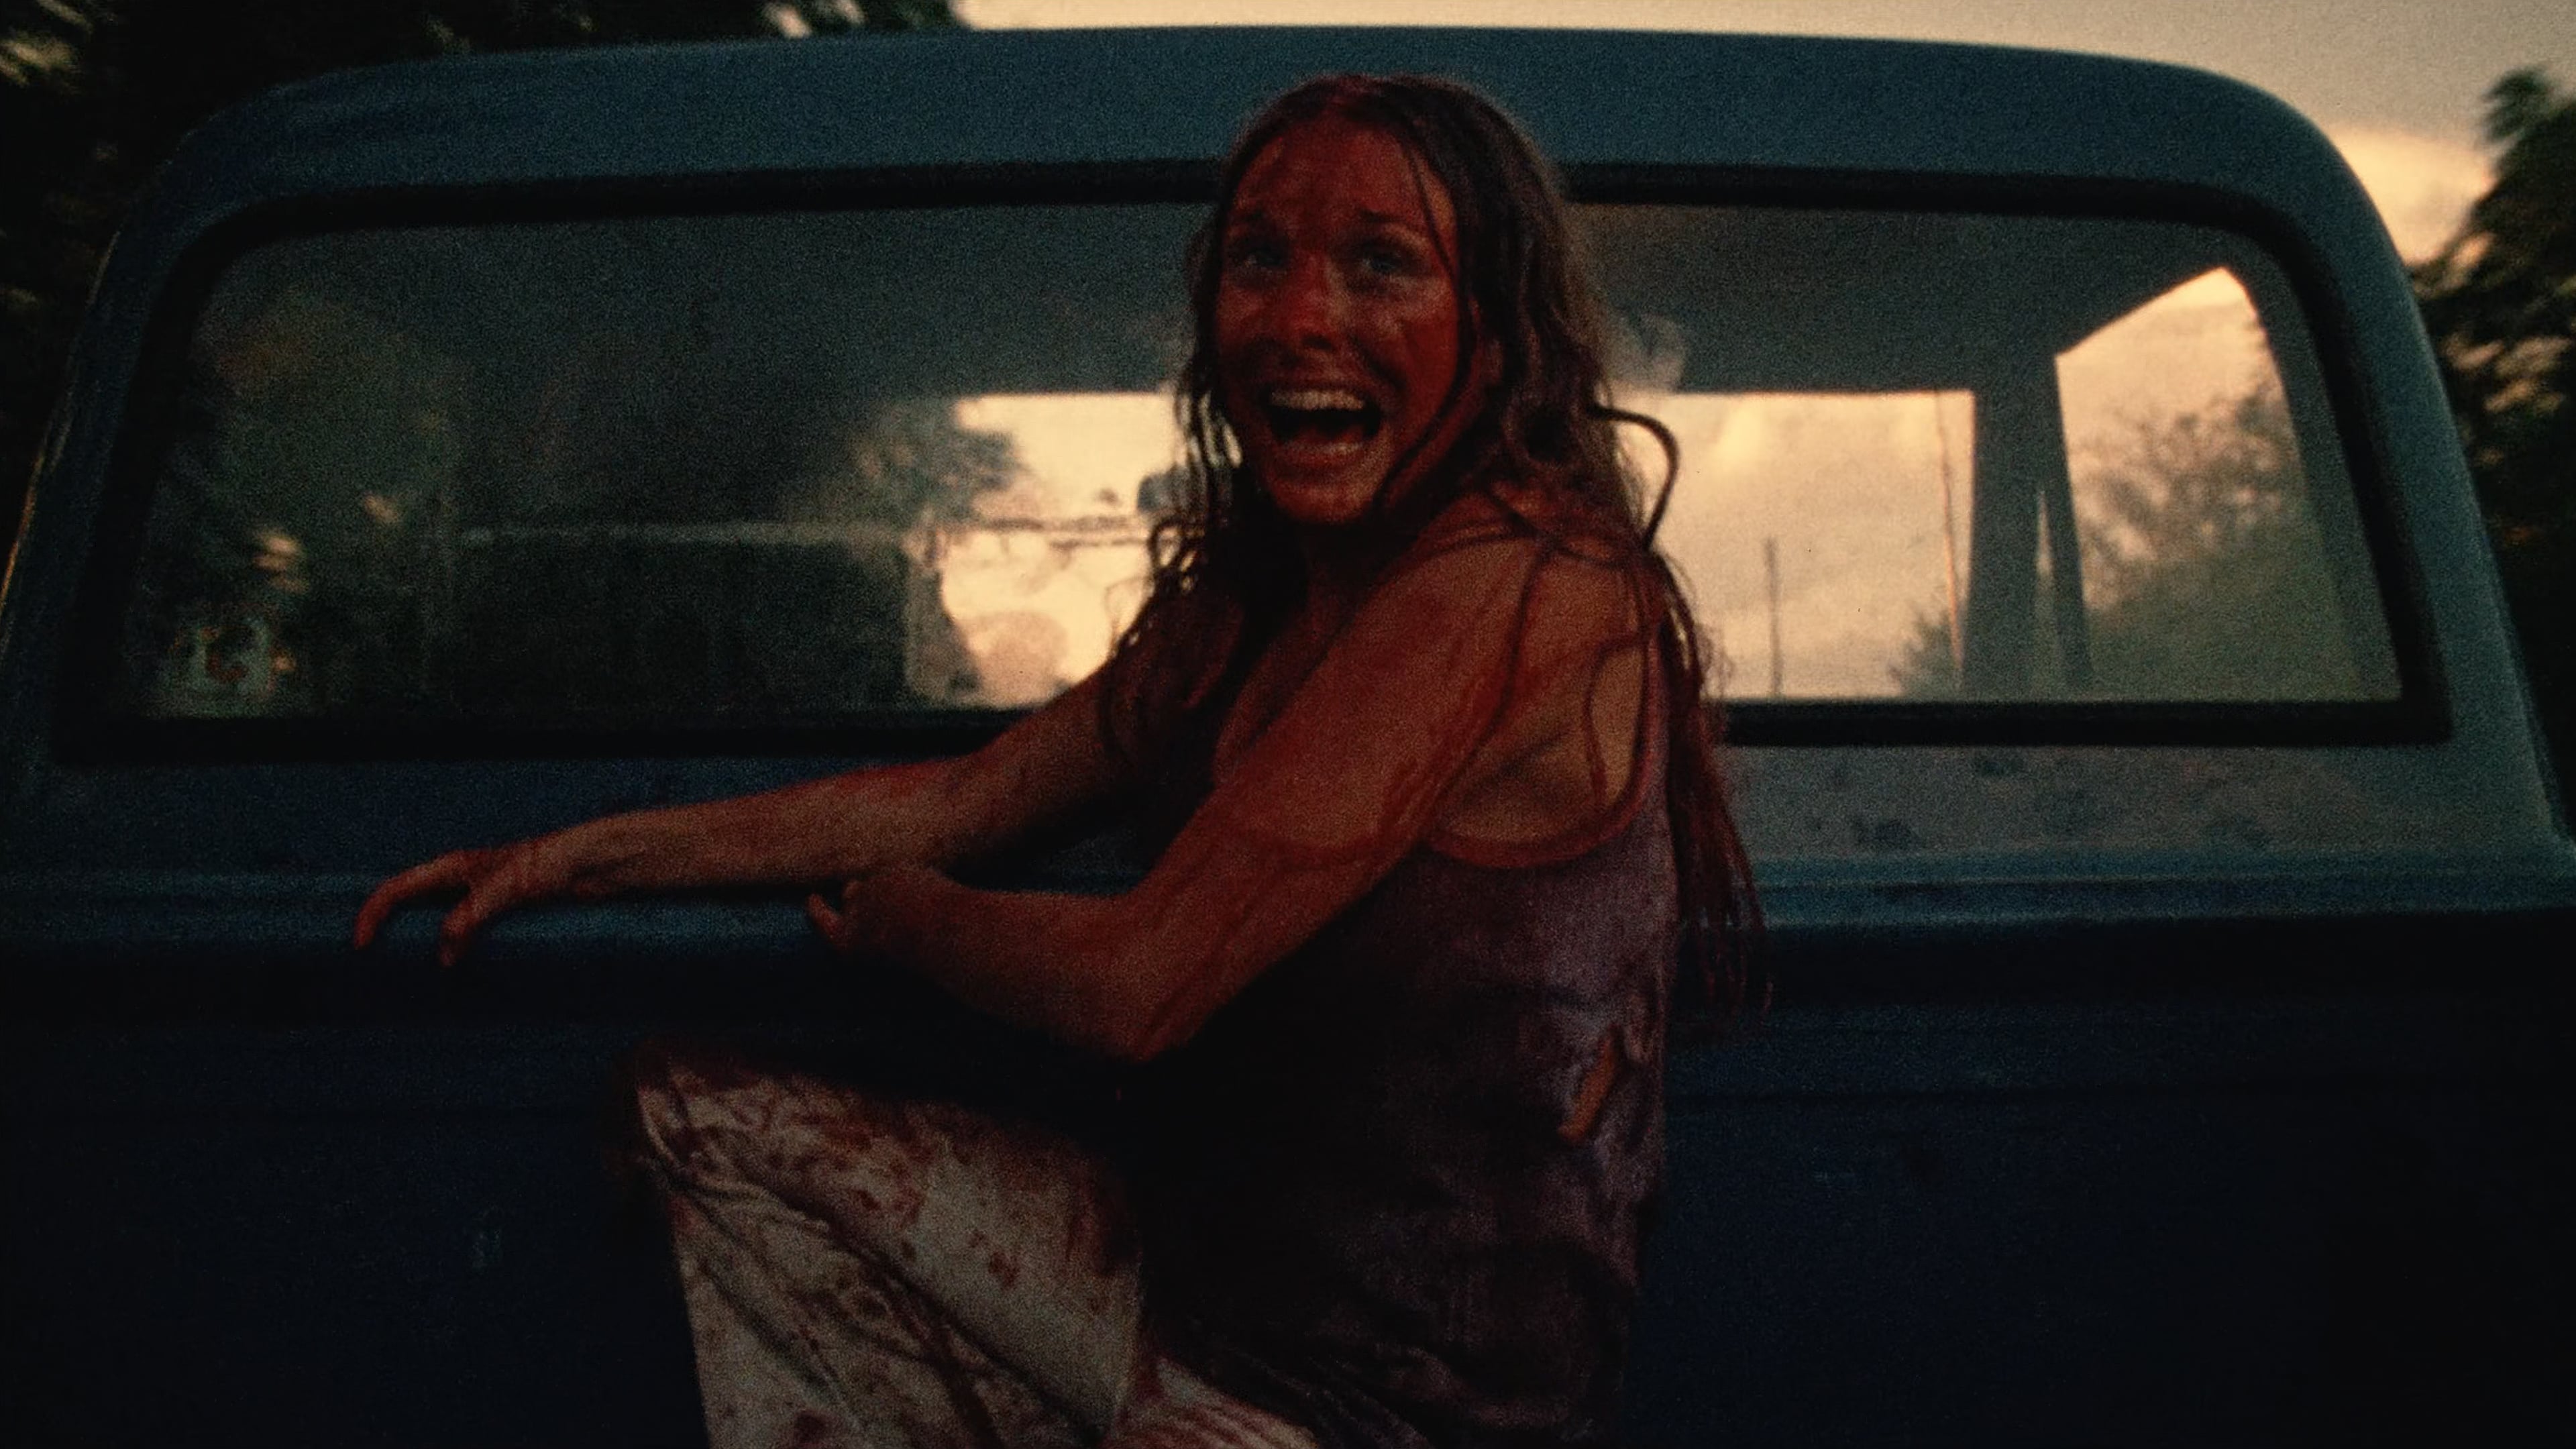 Review of The Texas Chain Saw Massacre.